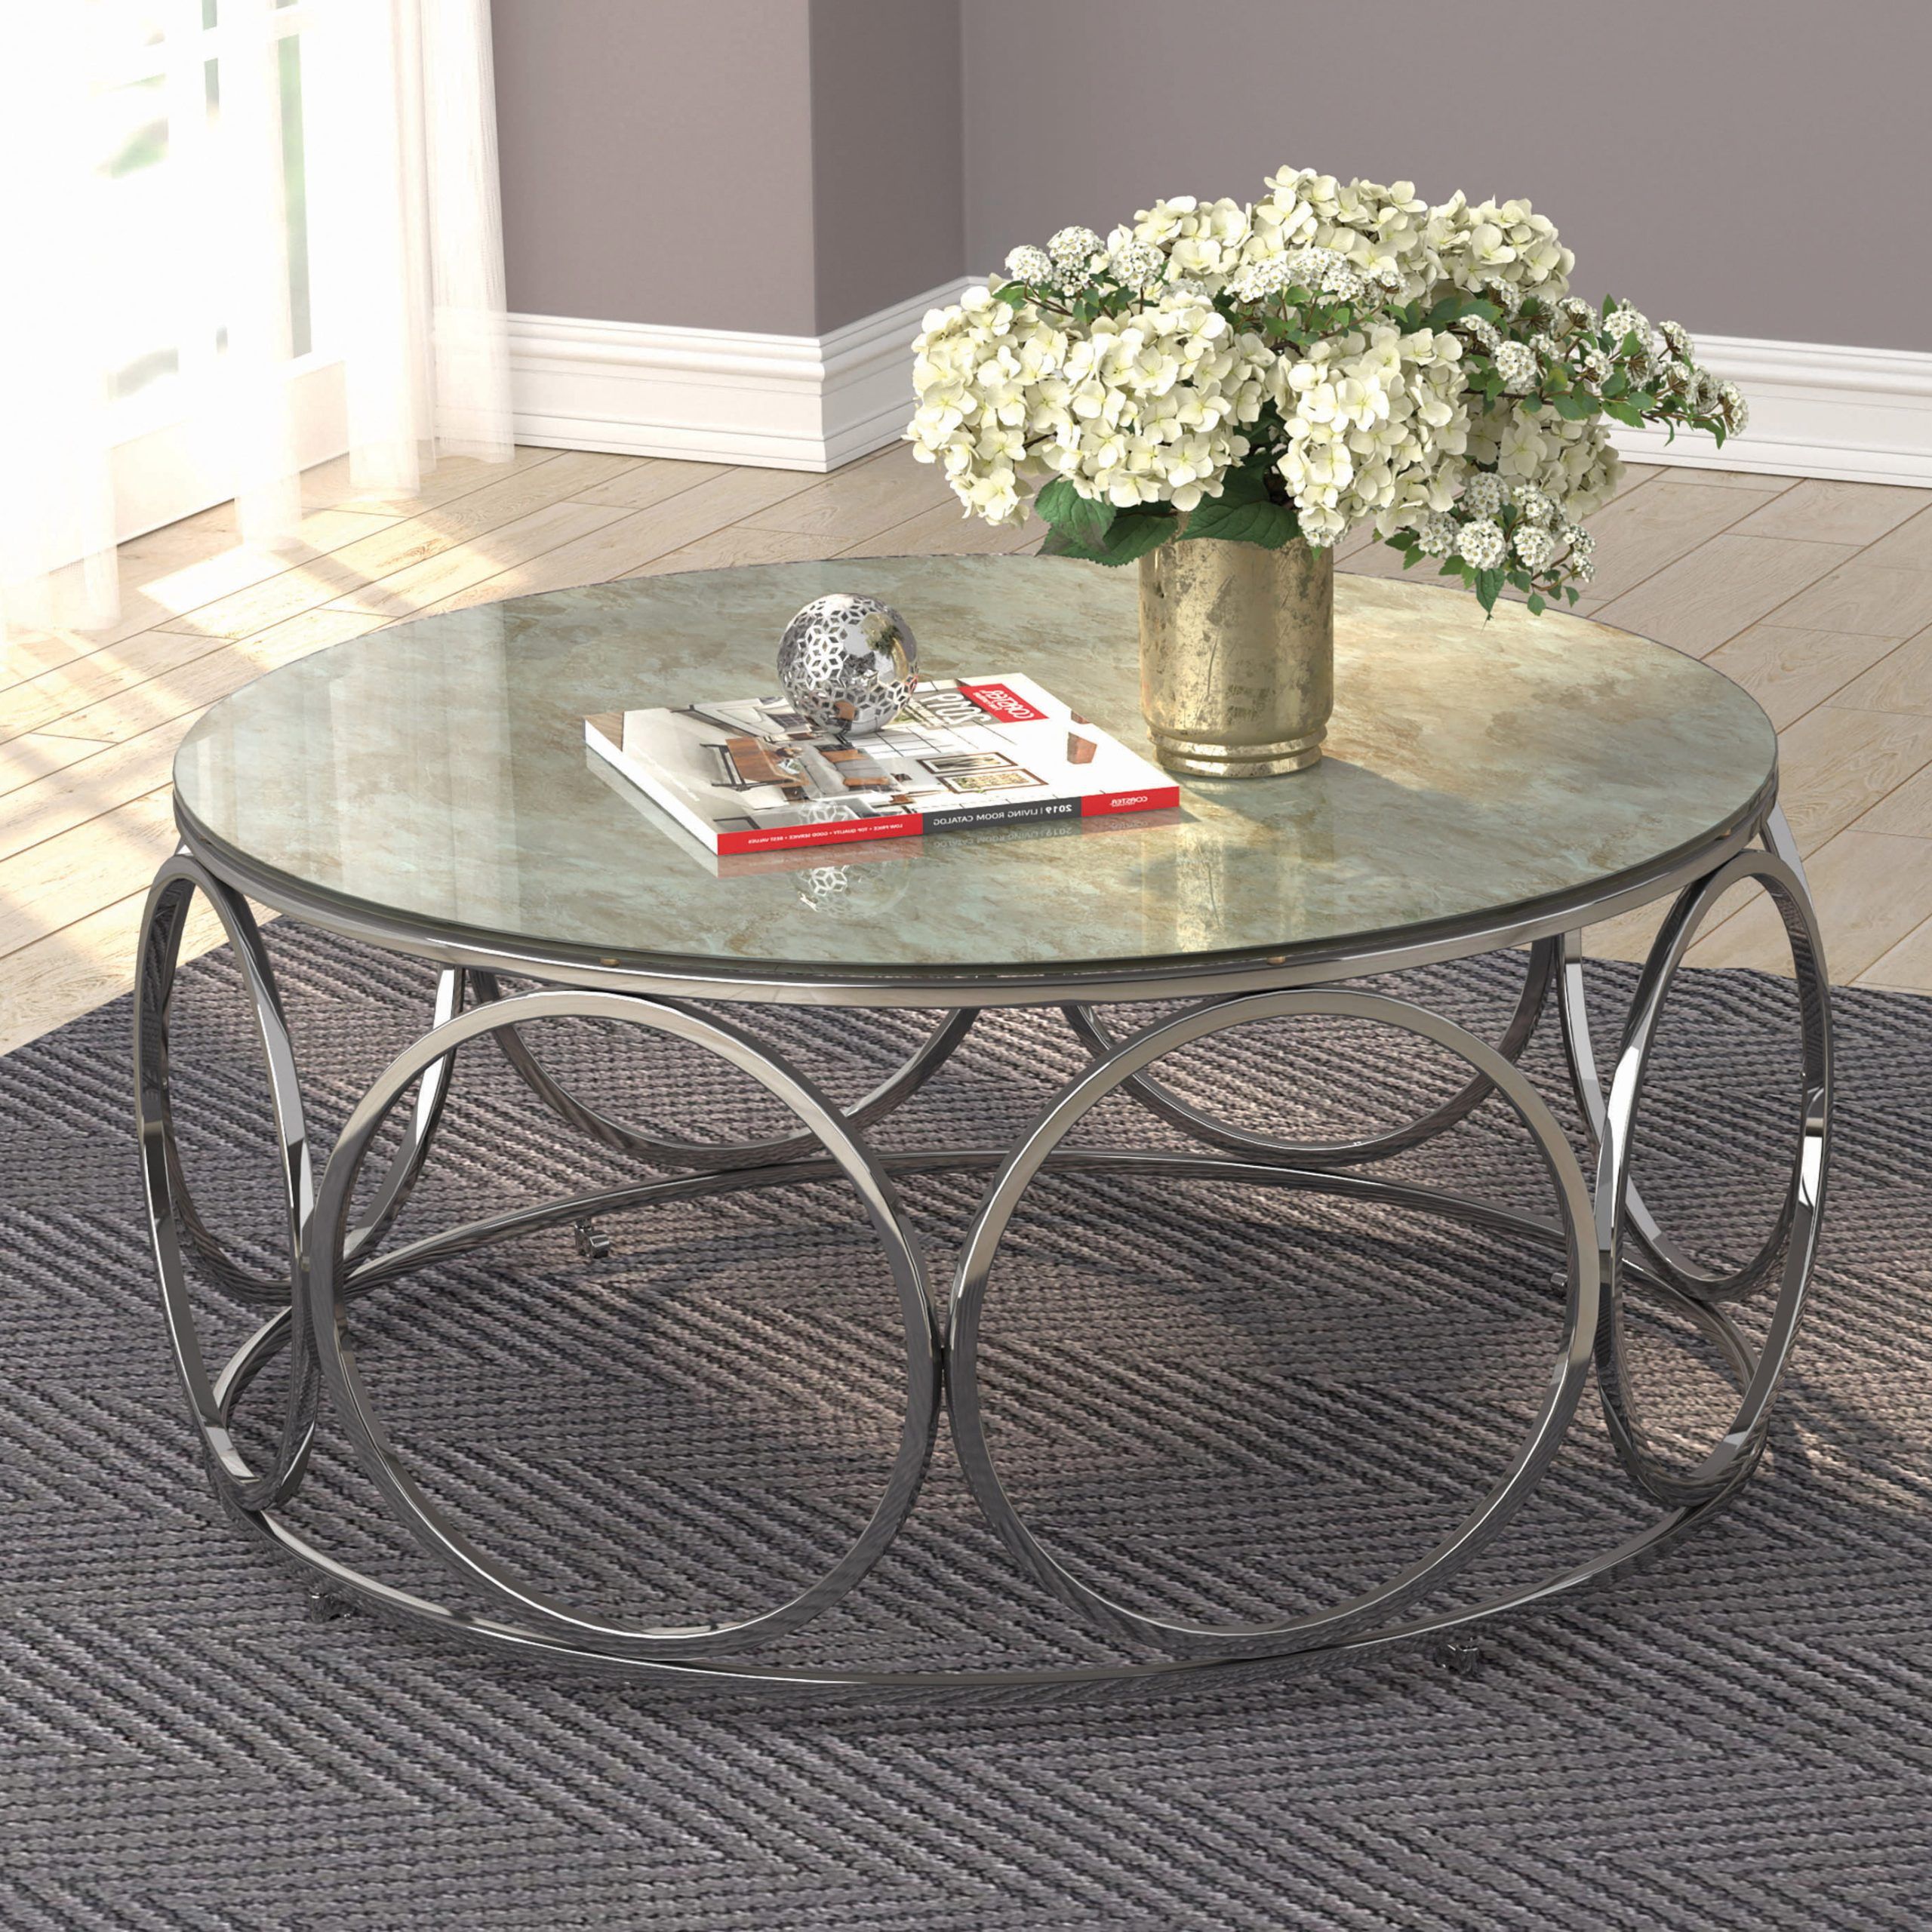 Round Coffee Table With Casters Beige Marble And Chrome – Walmart With Regard To Coffee Tables With Casters (Gallery 6 of 20)